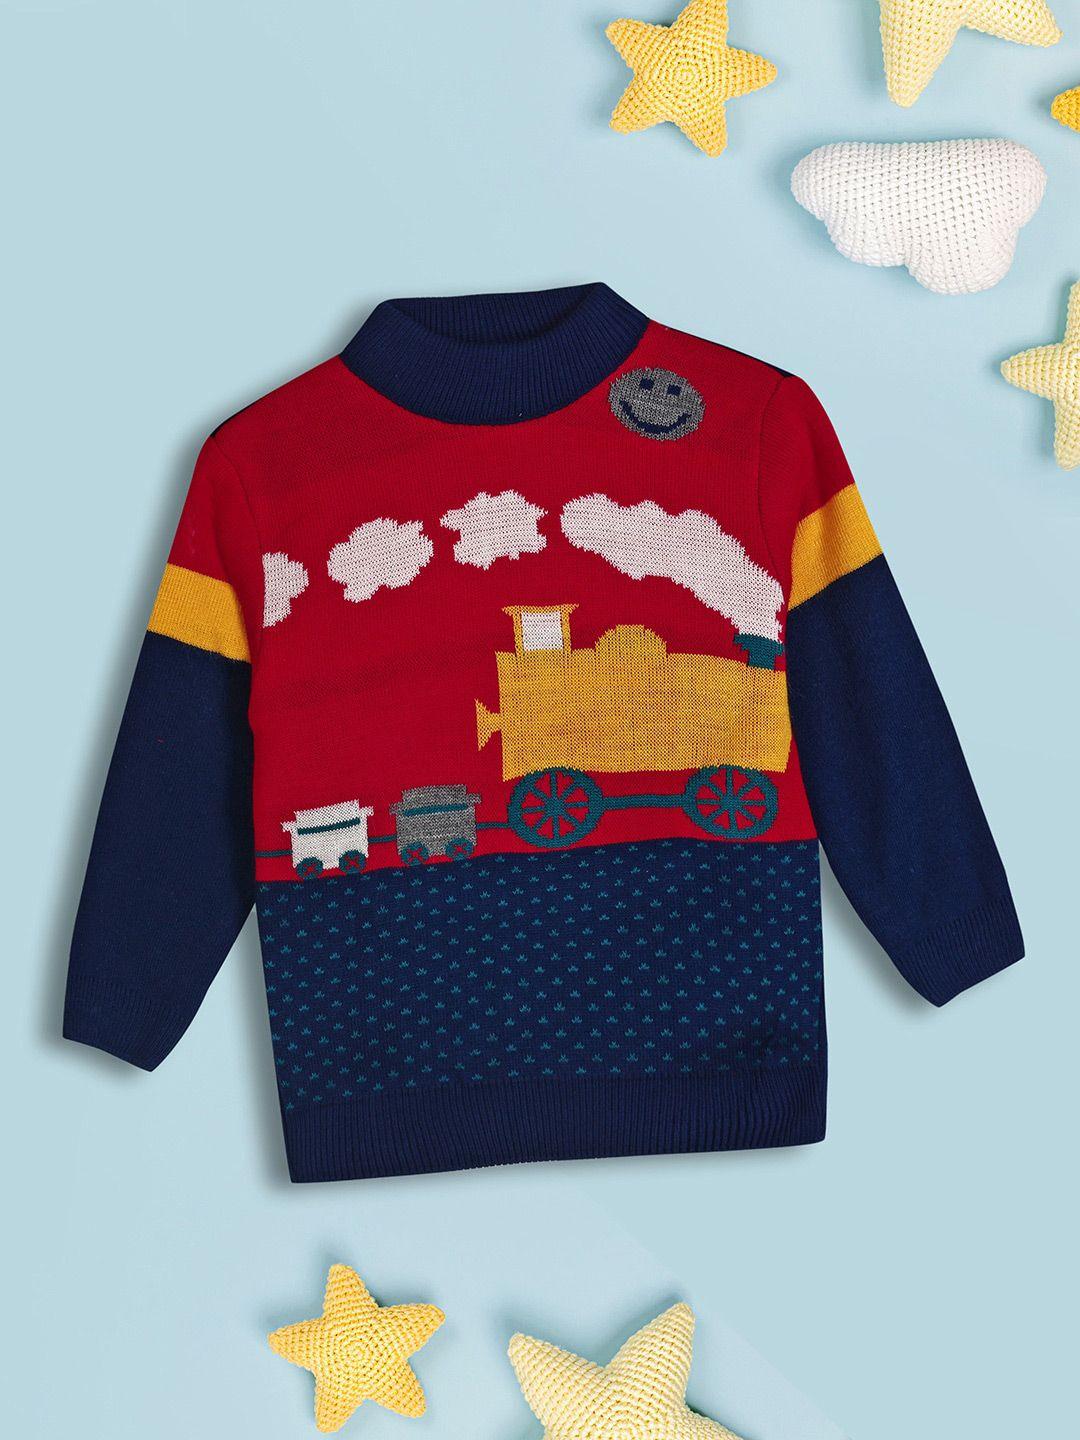 v-mart-boys-graphic-printed-turtle-neck-acrylic-pullover-sweater